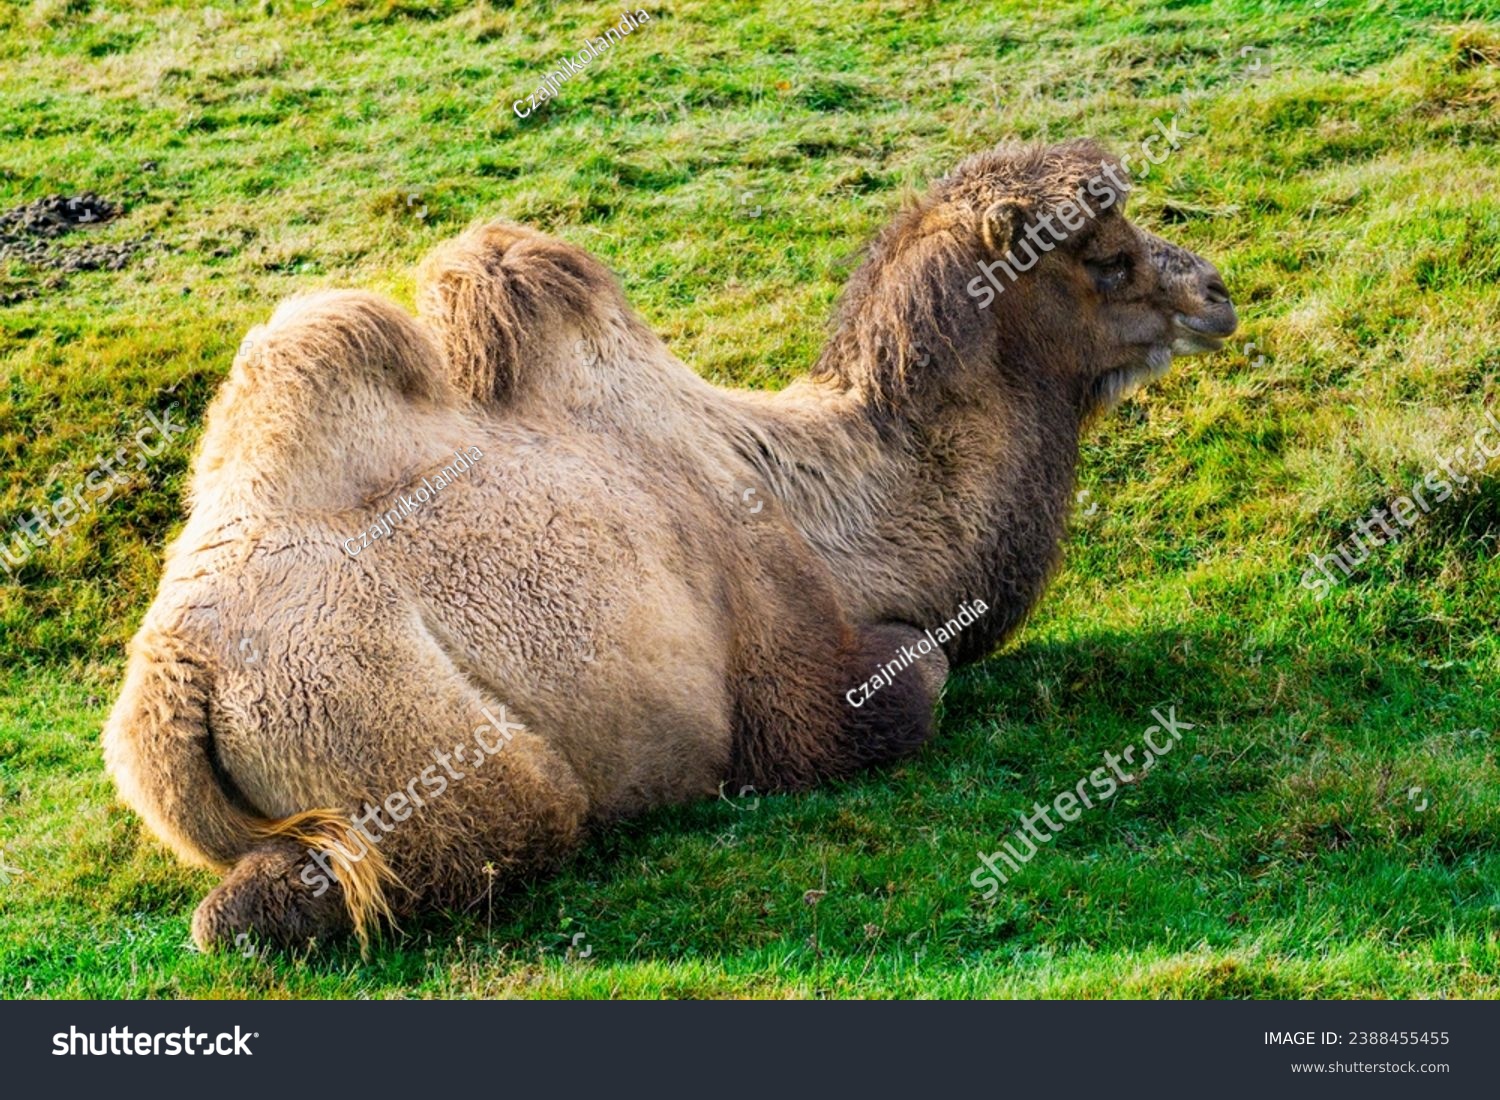 Bactrian camel (Camelus bactrianus) resting on grass #2388455455